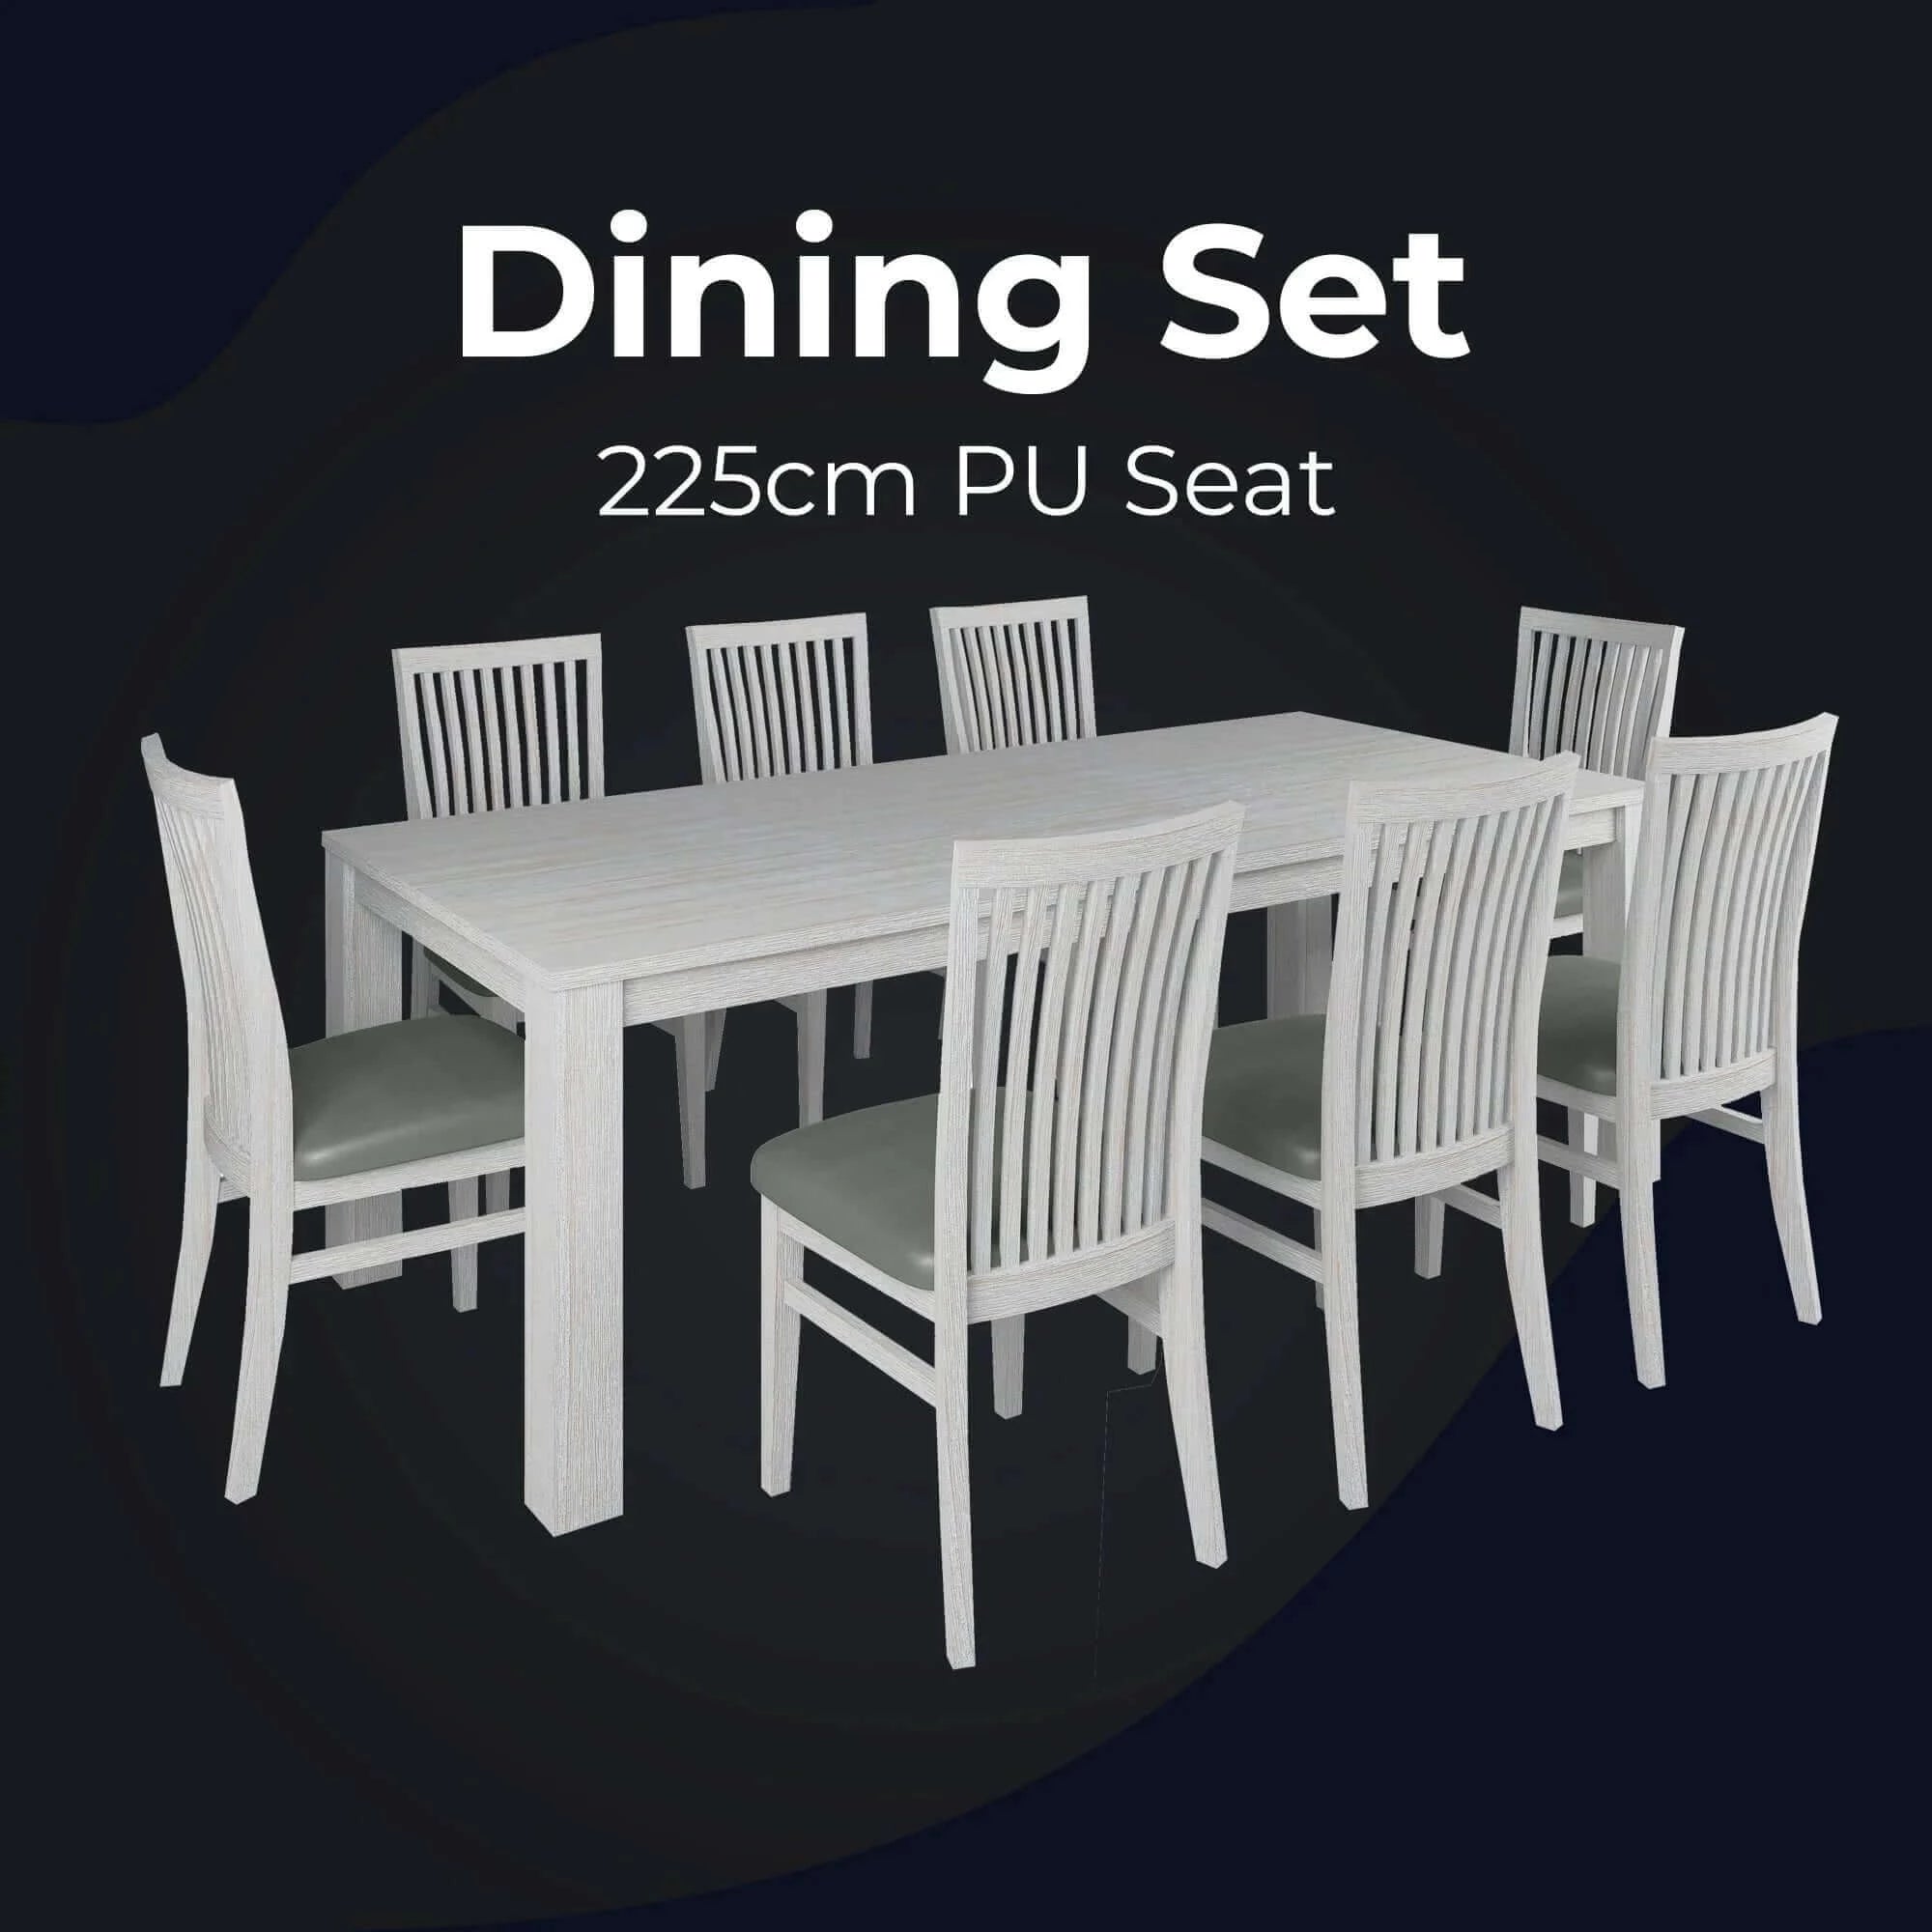 Buy foxglove 9pc dining set 225cm table 8 pu seat chair solid mt ash wood - white - upinteriors-Upinteriors